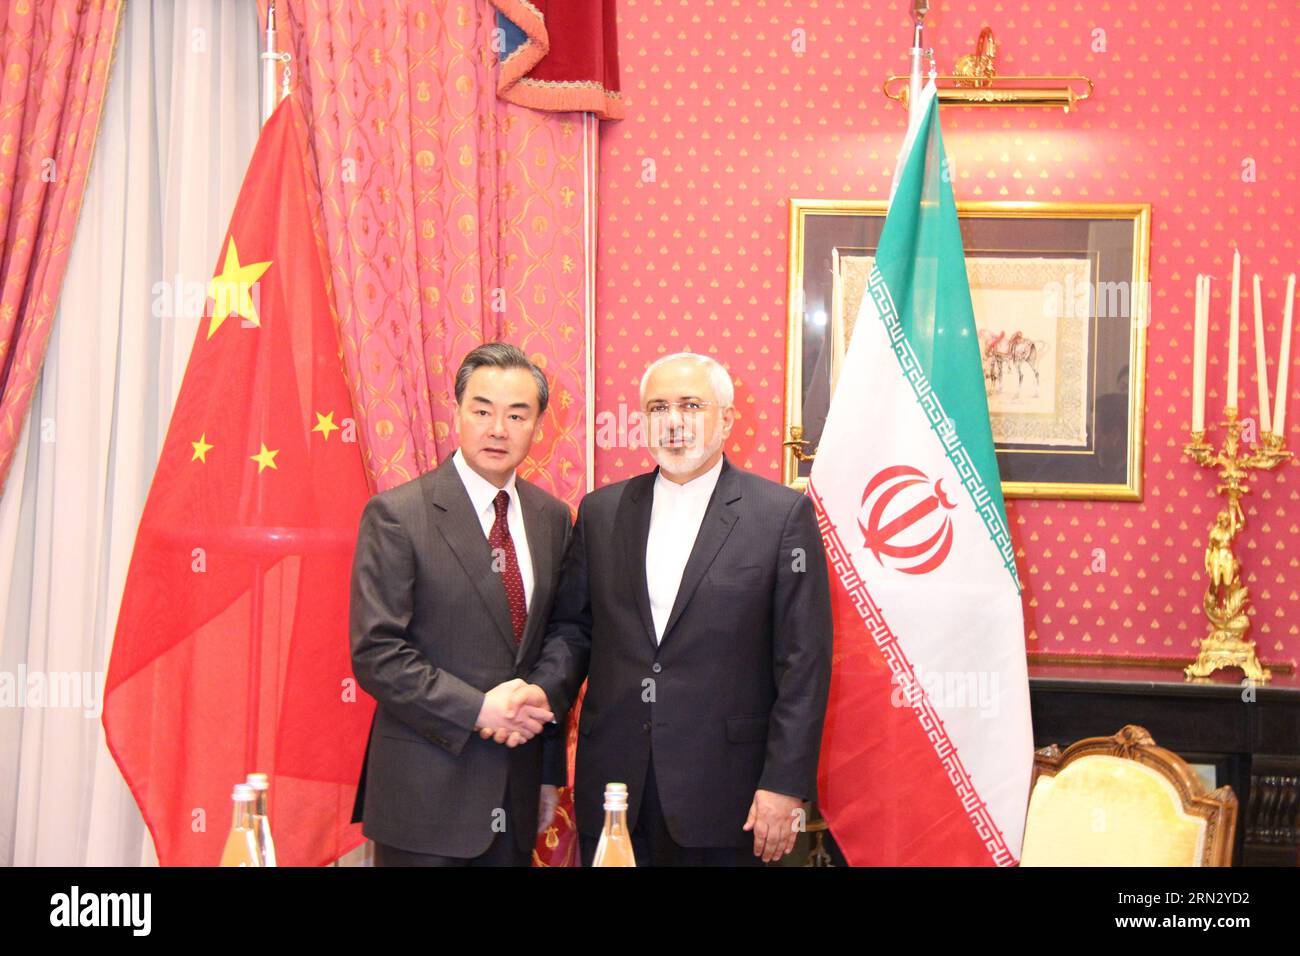 Chinese Foreign Minister Wang Yi (L) meets with his Iranian counterpart Mohammad Javad Zarif in Lausanne, Switzerland, on March 29, 2015. ) SWITZERLAND-LAUSANNE-CHINA-IRAN-MEETING ZhangxMiao PUBLICATIONxNOTxINxCHN   Chinese Foreign Ministers Wang Yi l Meets With His Iranian Part Mohammad Javad Zarif in Lausanne Switzerland ON March 29 2015 Switzerland Lausanne China Iran Meeting  PUBLICATIONxNOTxINxCHN Stock Photo